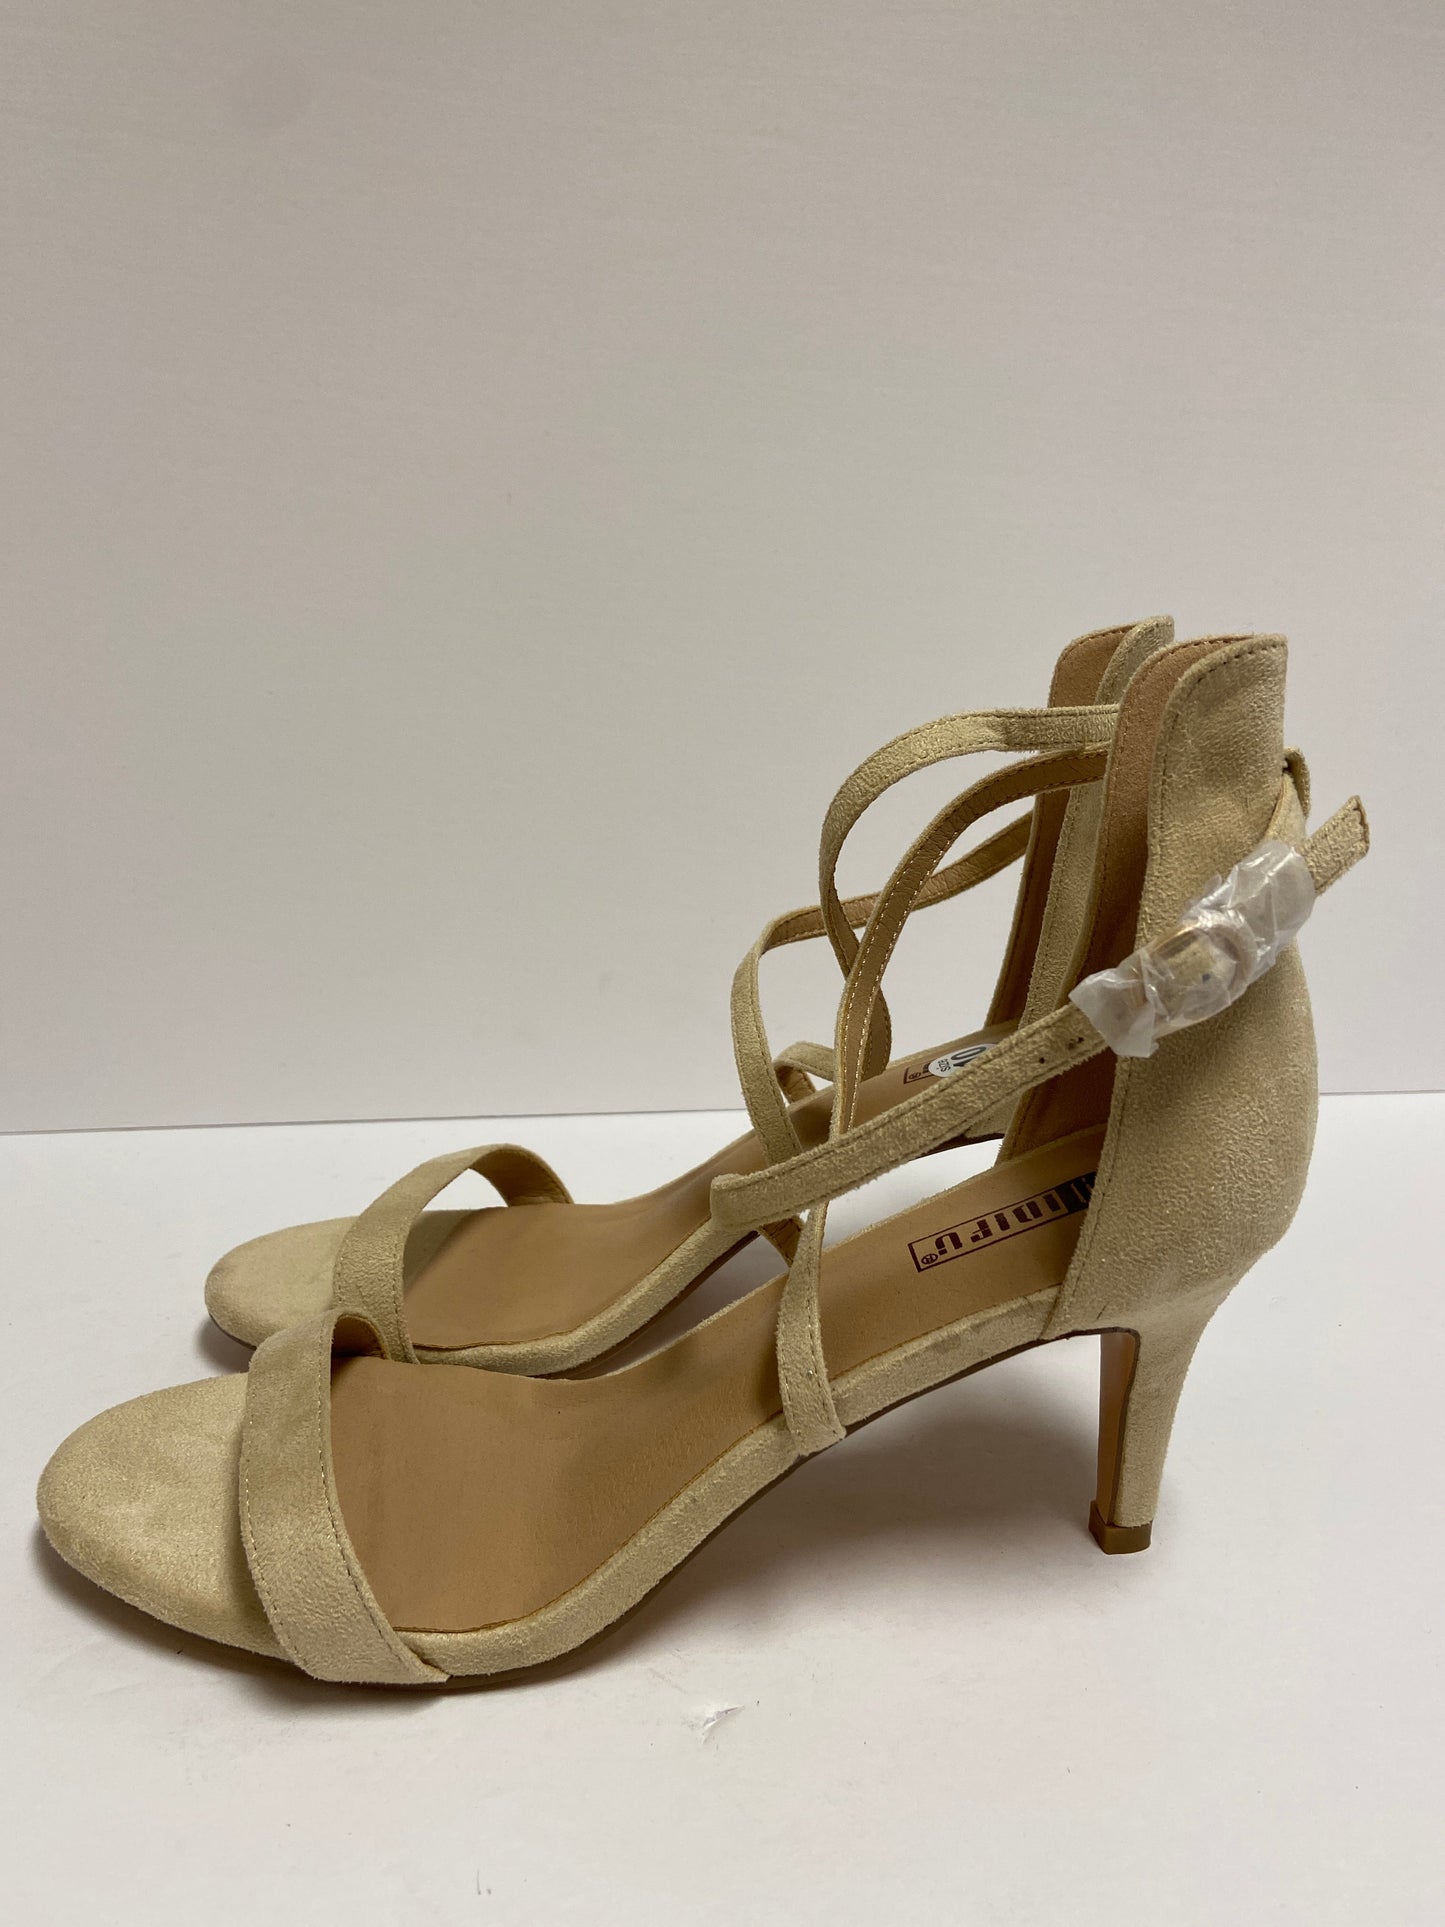 Sandals Heels Stiletto By Clothes Mentor  Size: 10